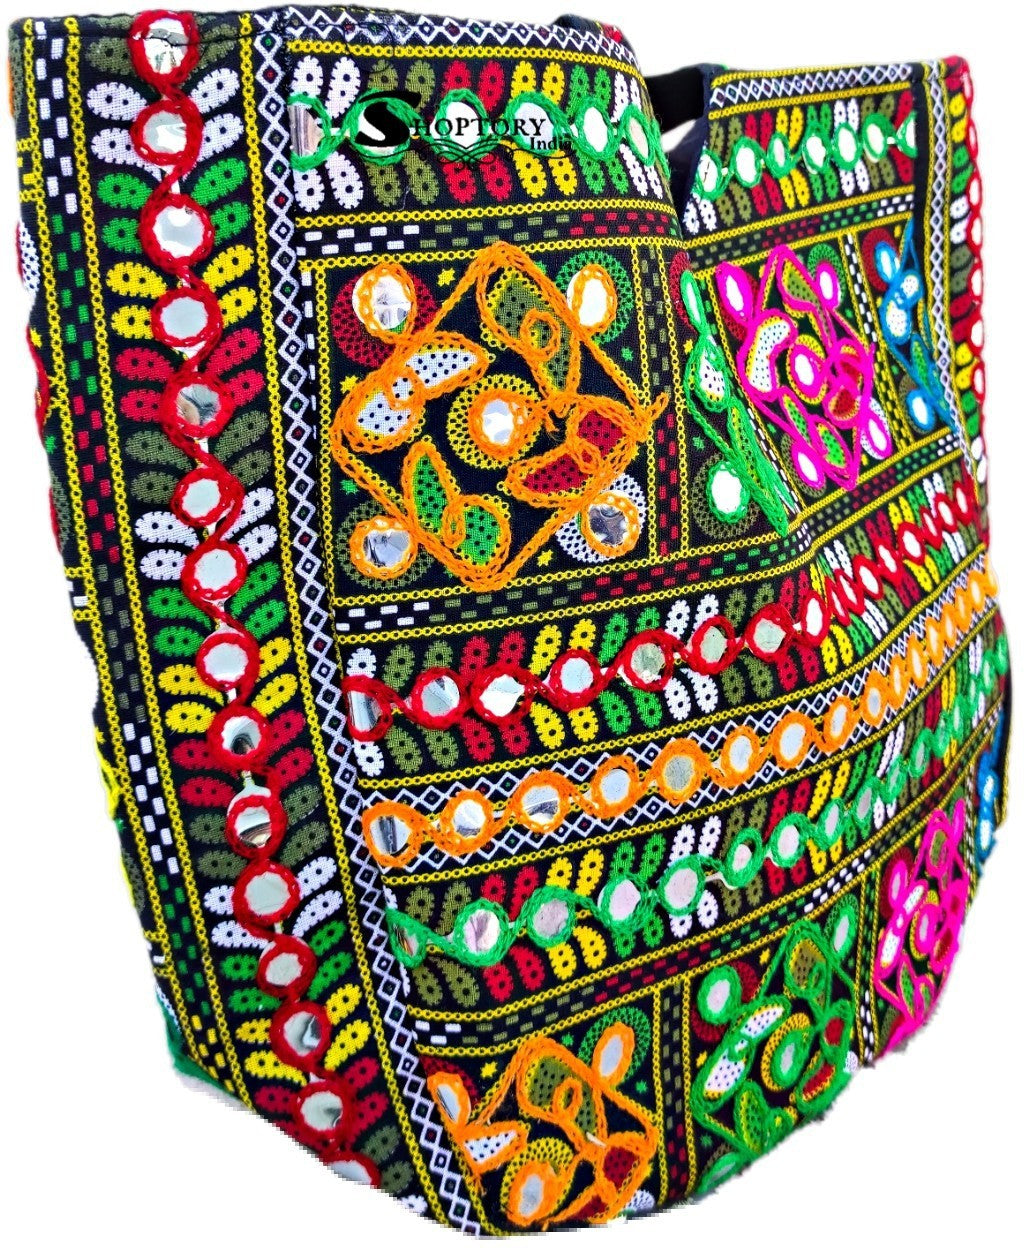 Women's Rajasthani Embroidered Jaipuri Handcrafted Bags   - Ritzie